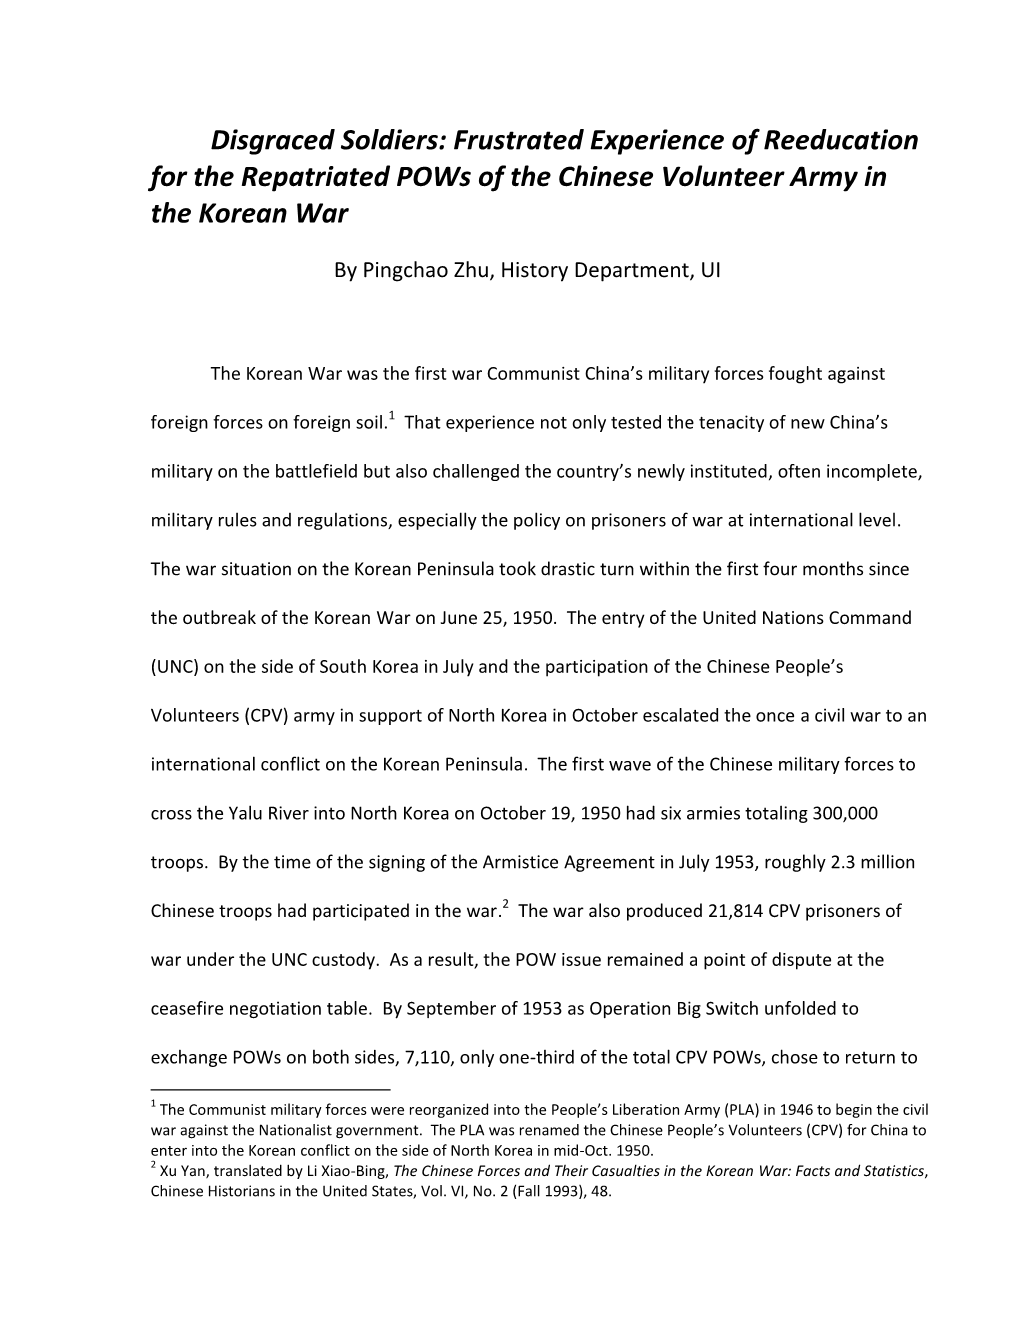 Disgraced Soldiers: Frustrated Experience of Reeducation for the Repatriated Pows of the Chinese Volunteer Army in the Korean War